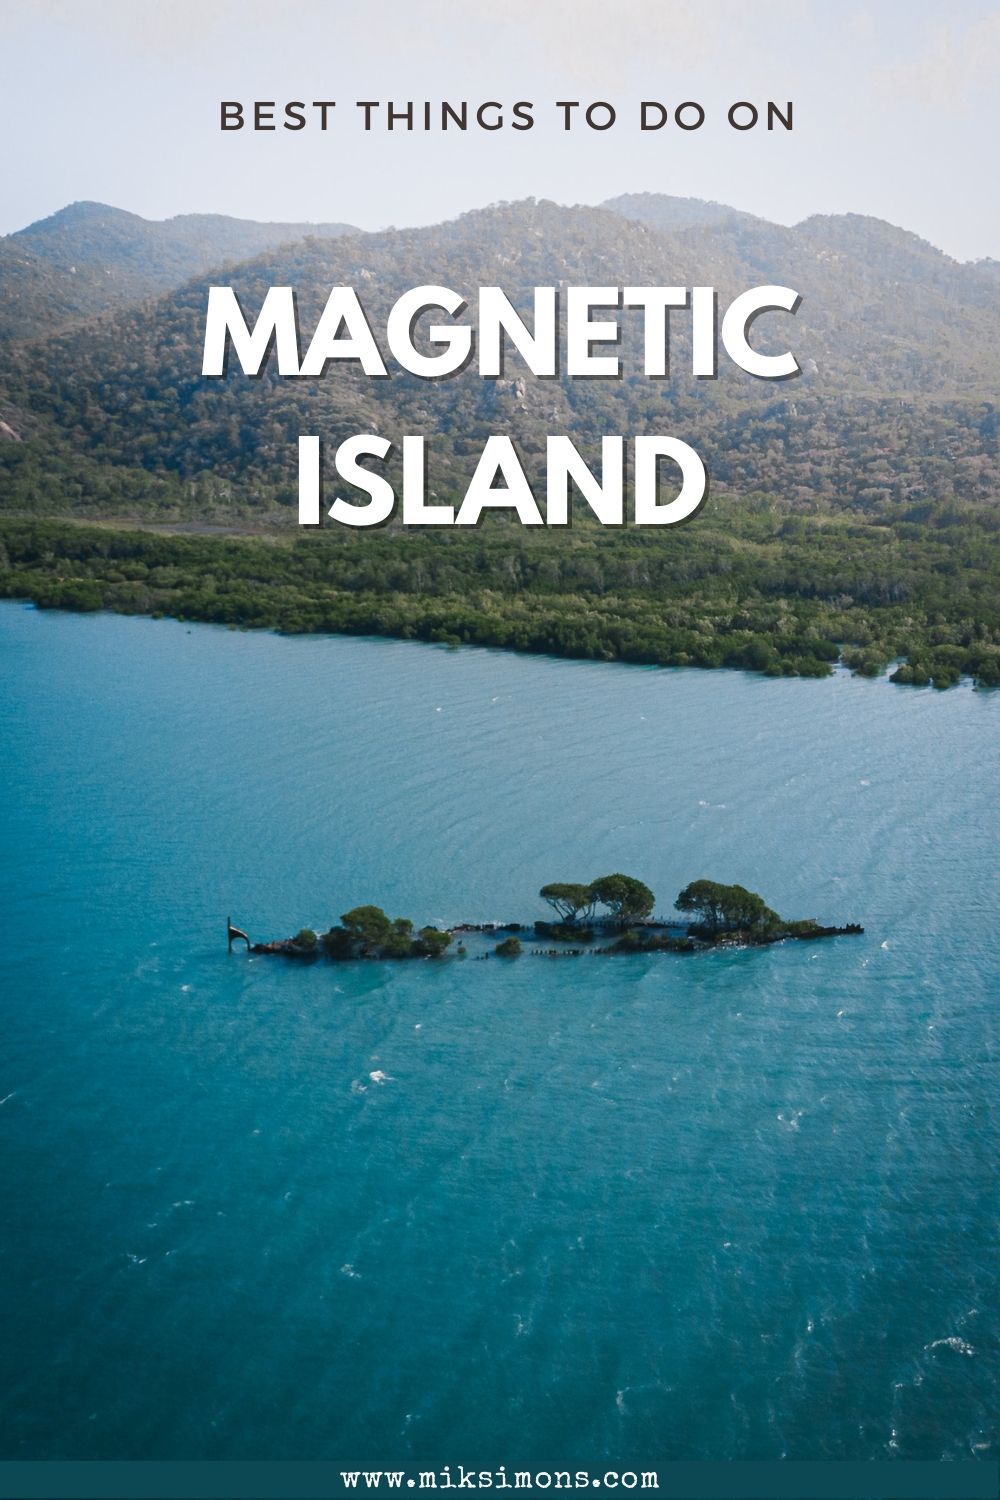 9 best things to do on Magnetic Island1